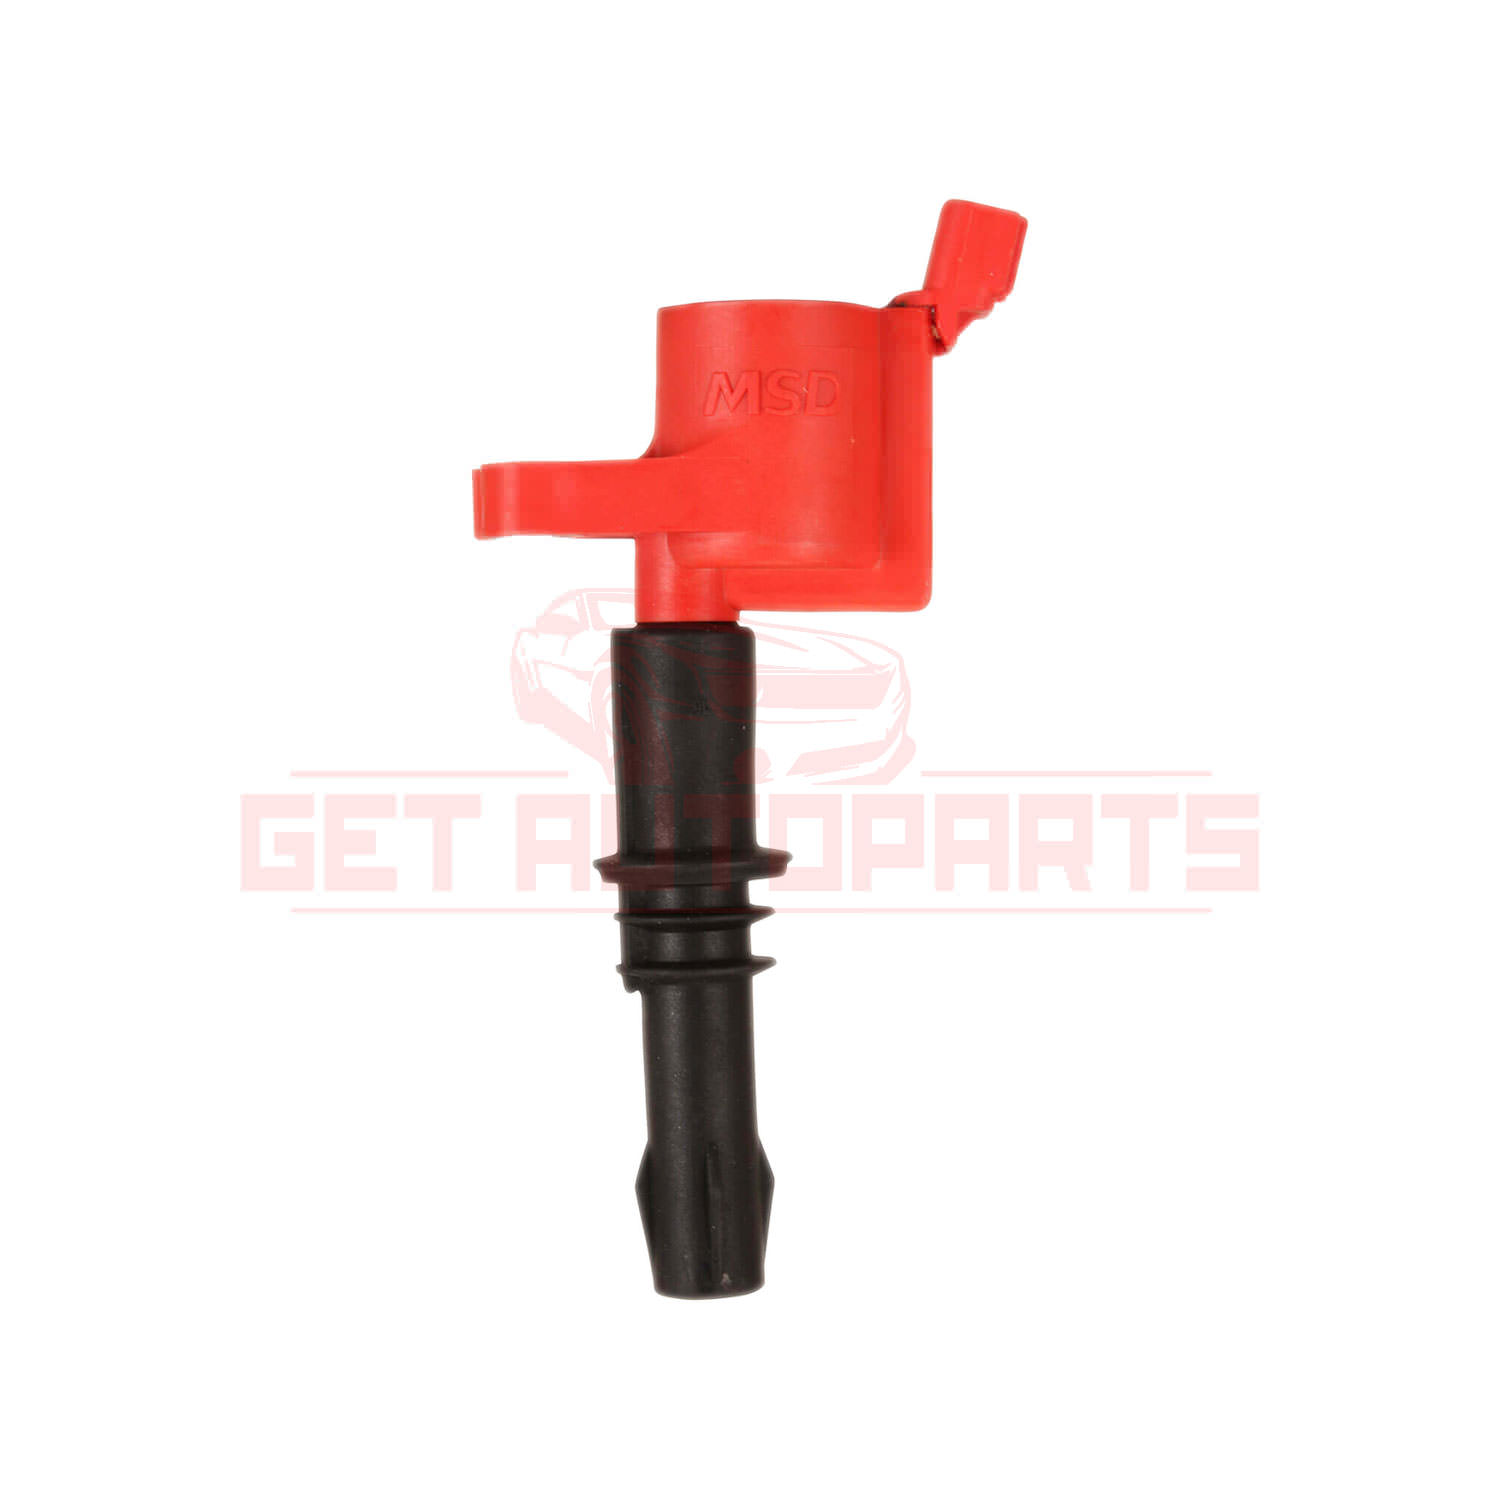 MSD Ignition Coil for Ford E-250 05-2007